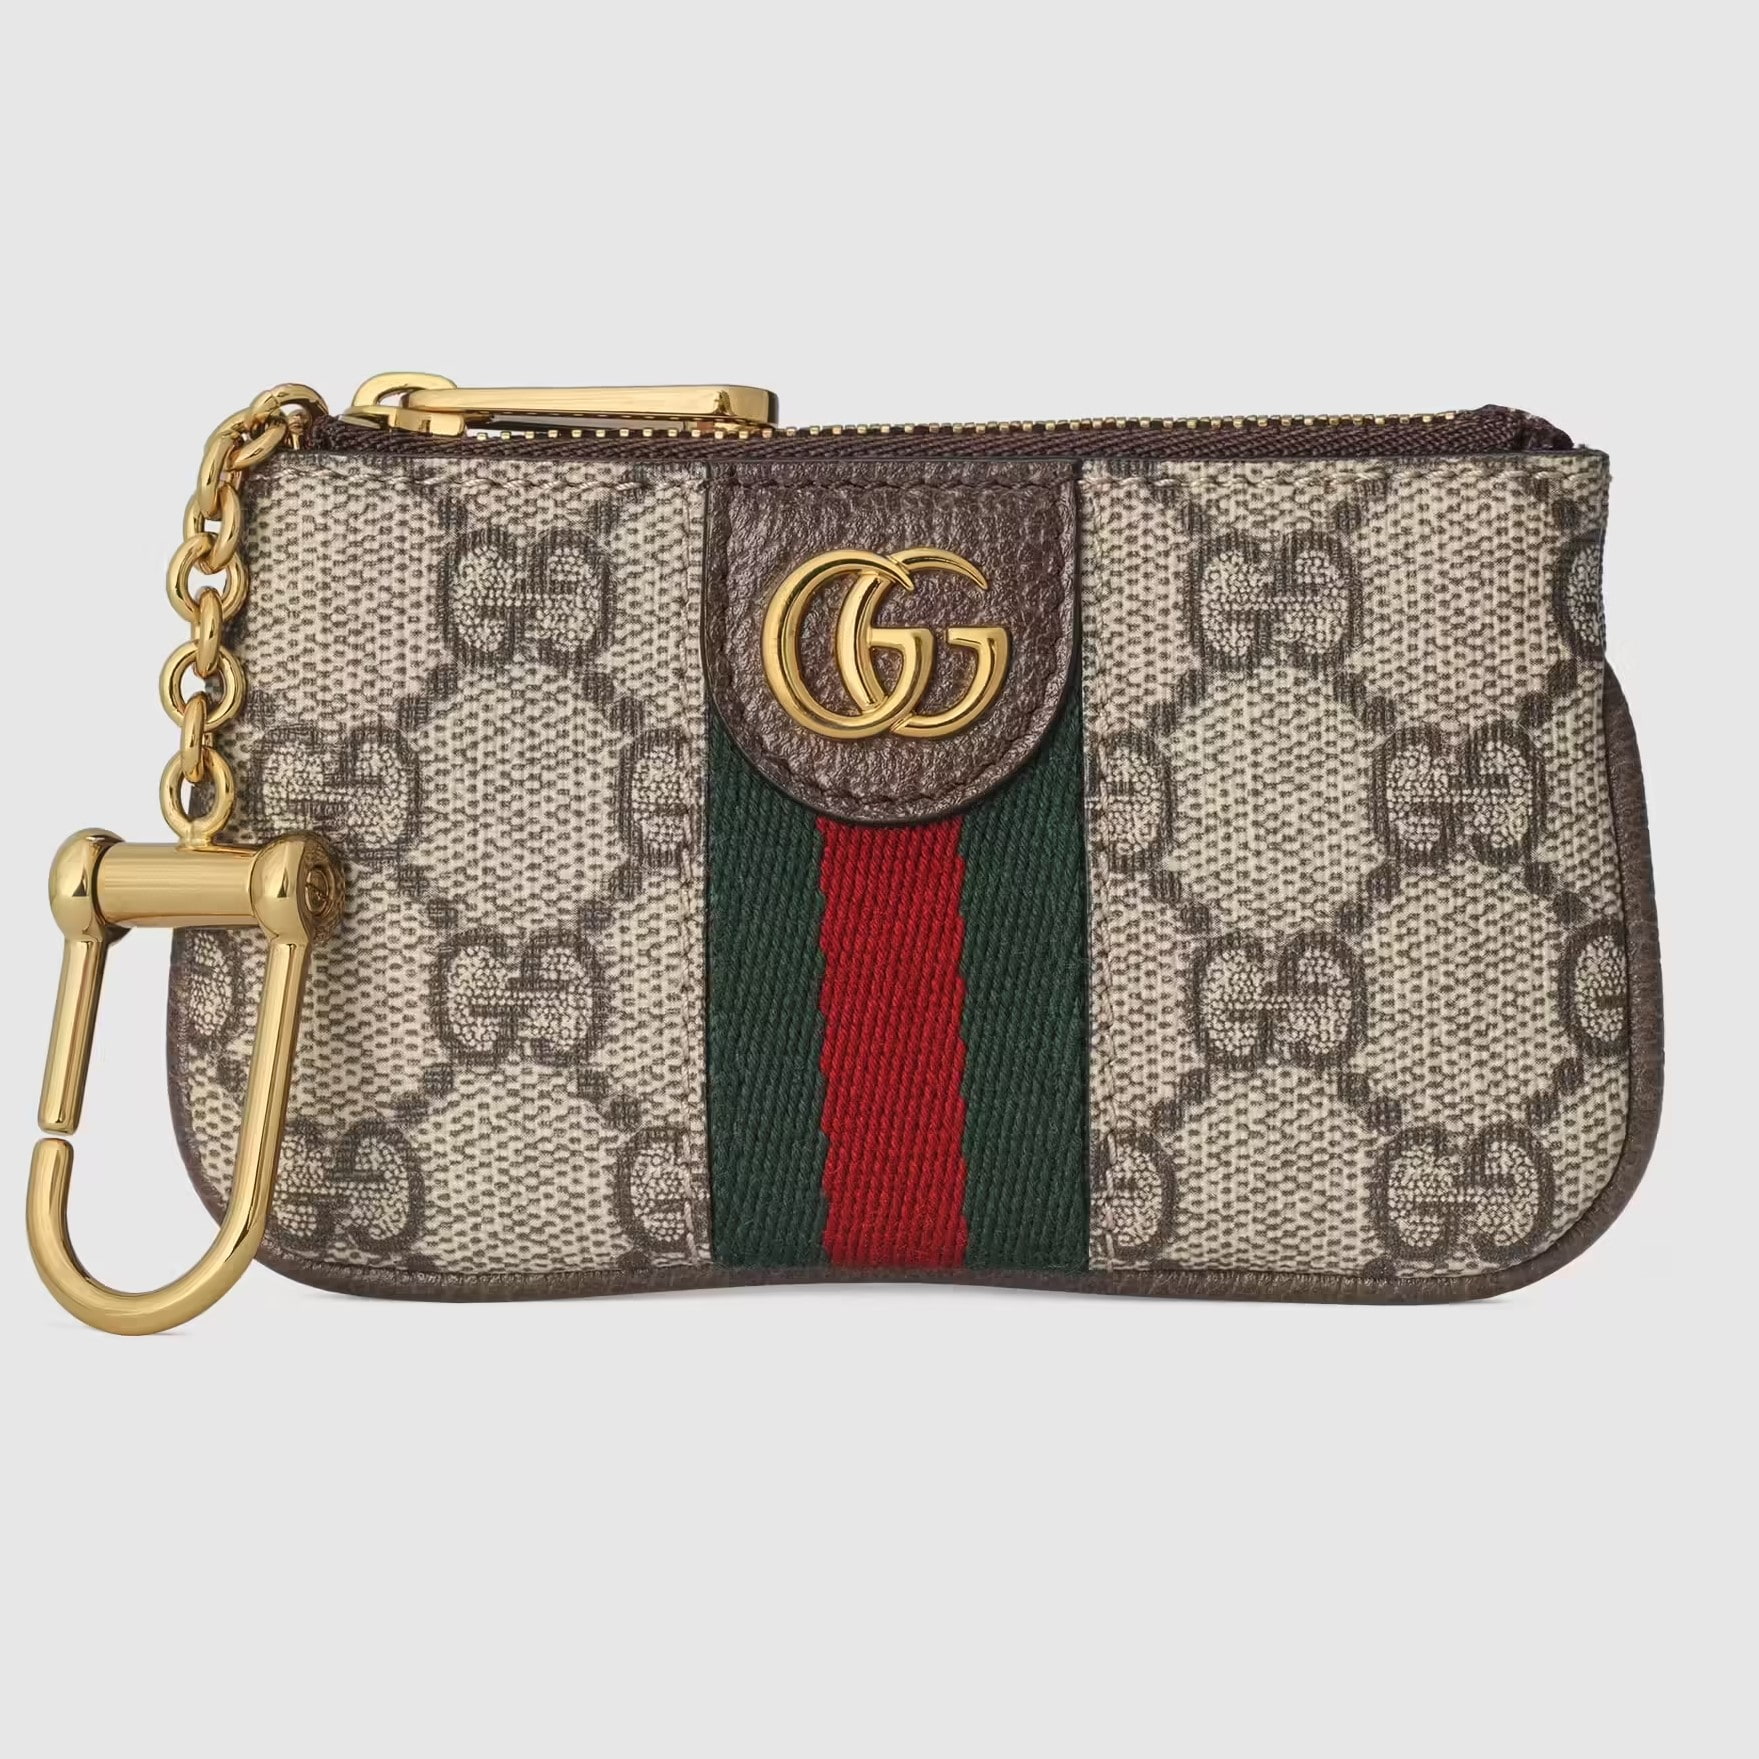 VÍ GUCCI MINI LIGHT OPHIDIA KEY CASE IN BEIGE AND EBONY GG SUPREME CANVAS 5